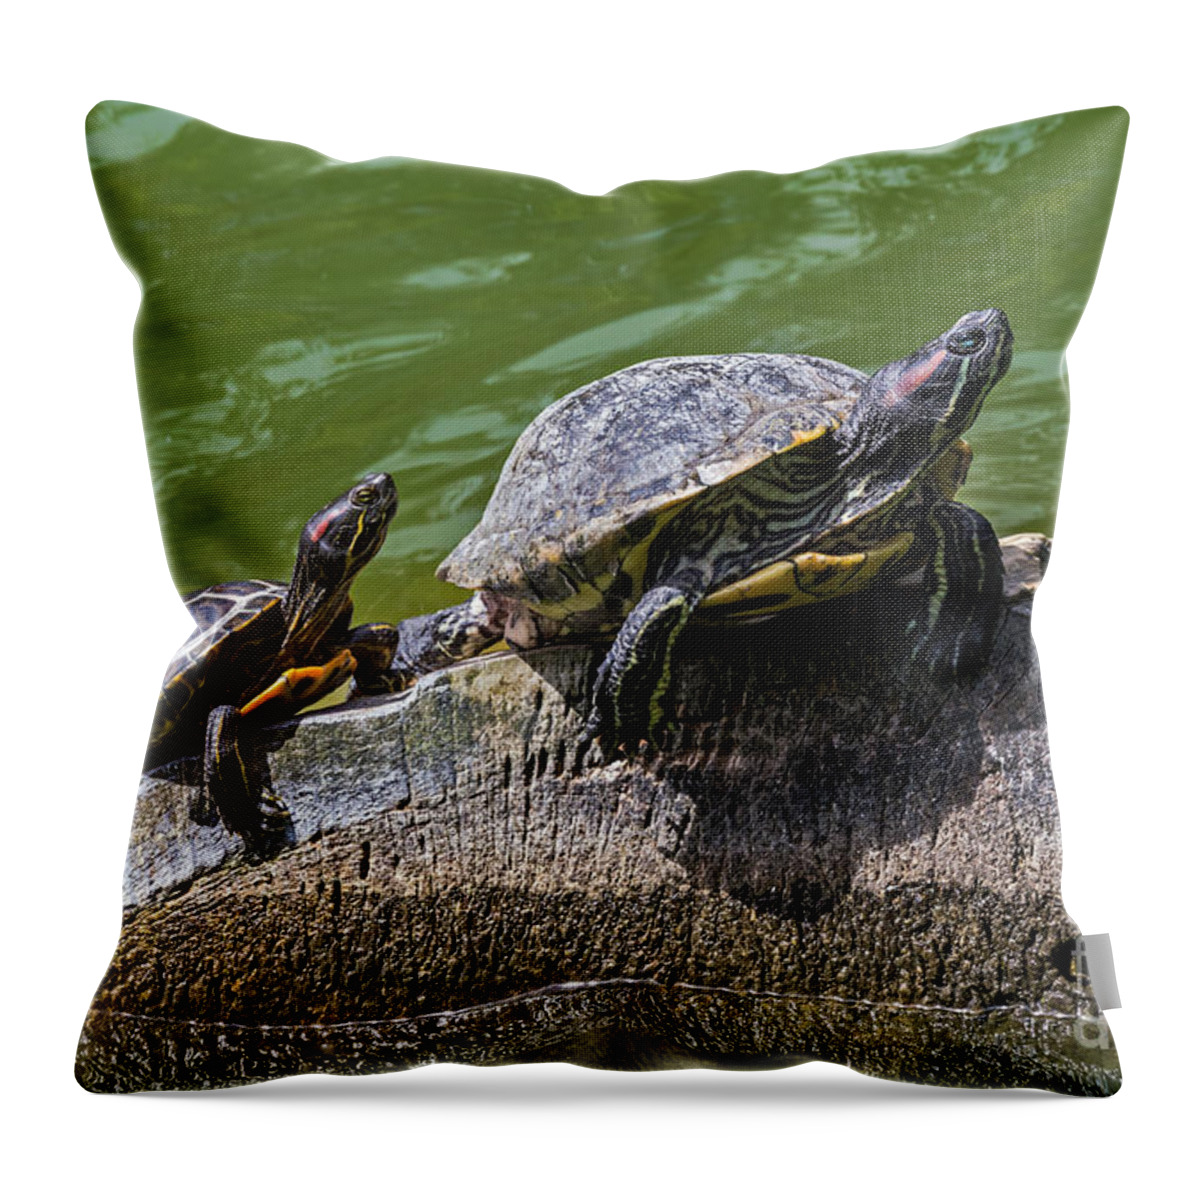 Golden Gate Park Throw Pillow featuring the photograph Learning the Ropes by Kate Brown